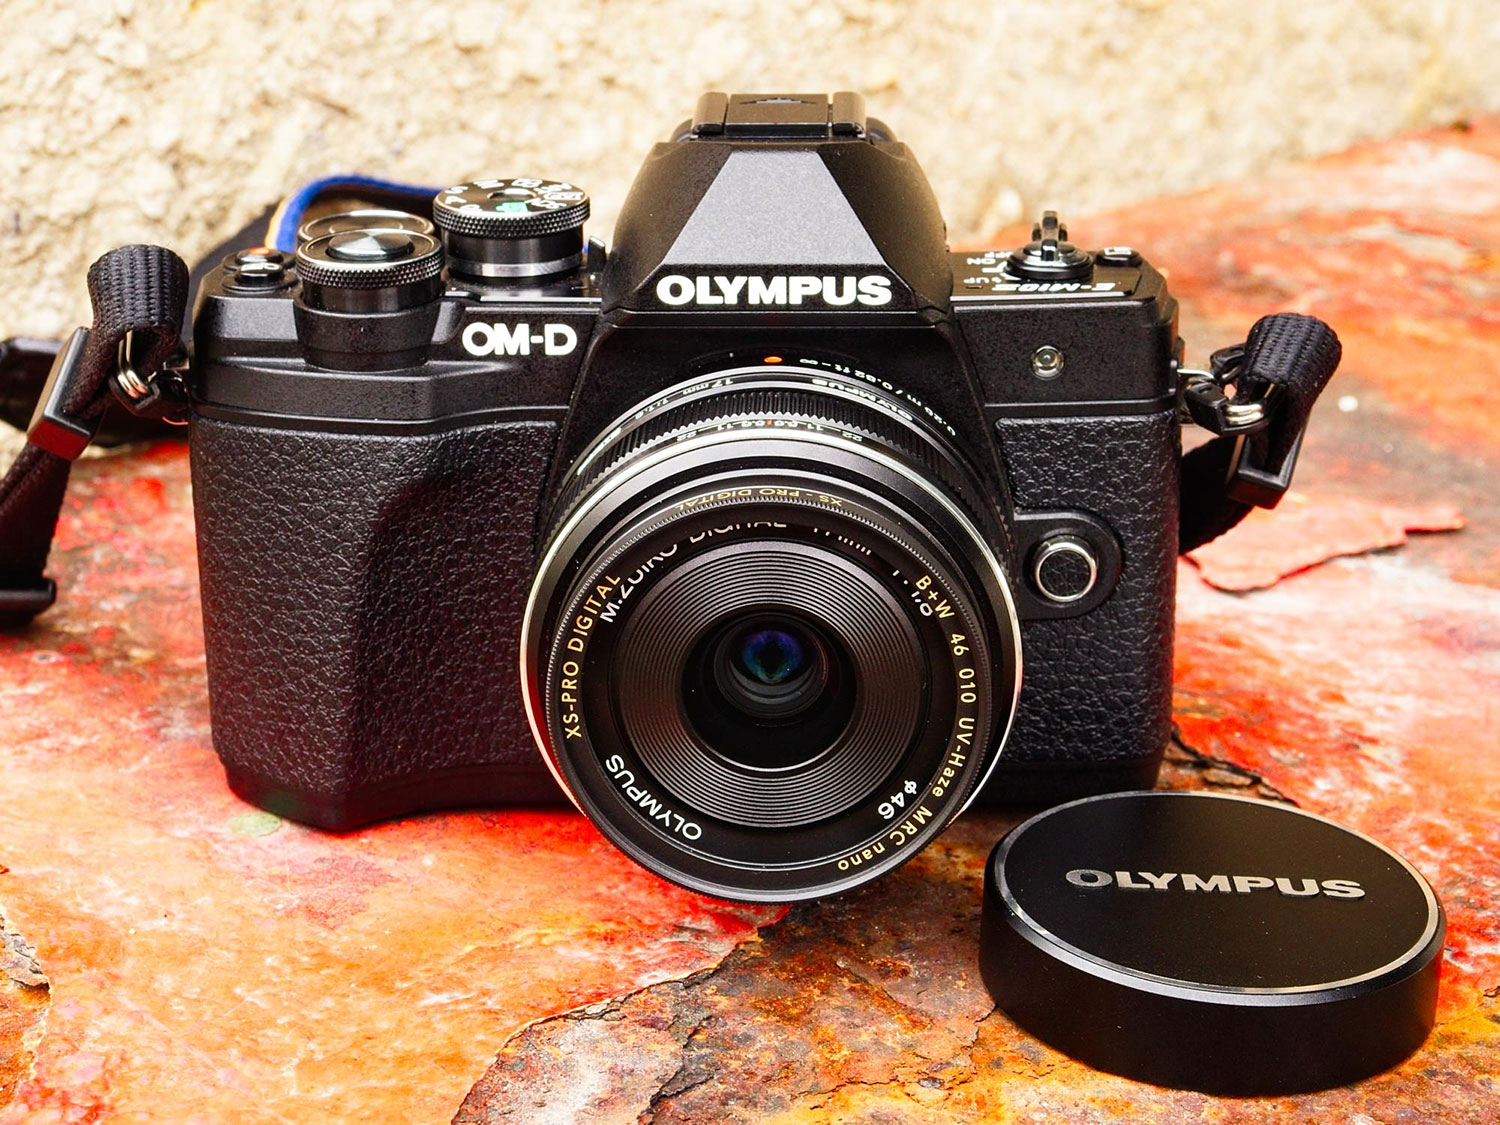 Aarzelen dorst Herhaal Olympus OM-D E-M10 III - A street photographer's review - Olympus Passion